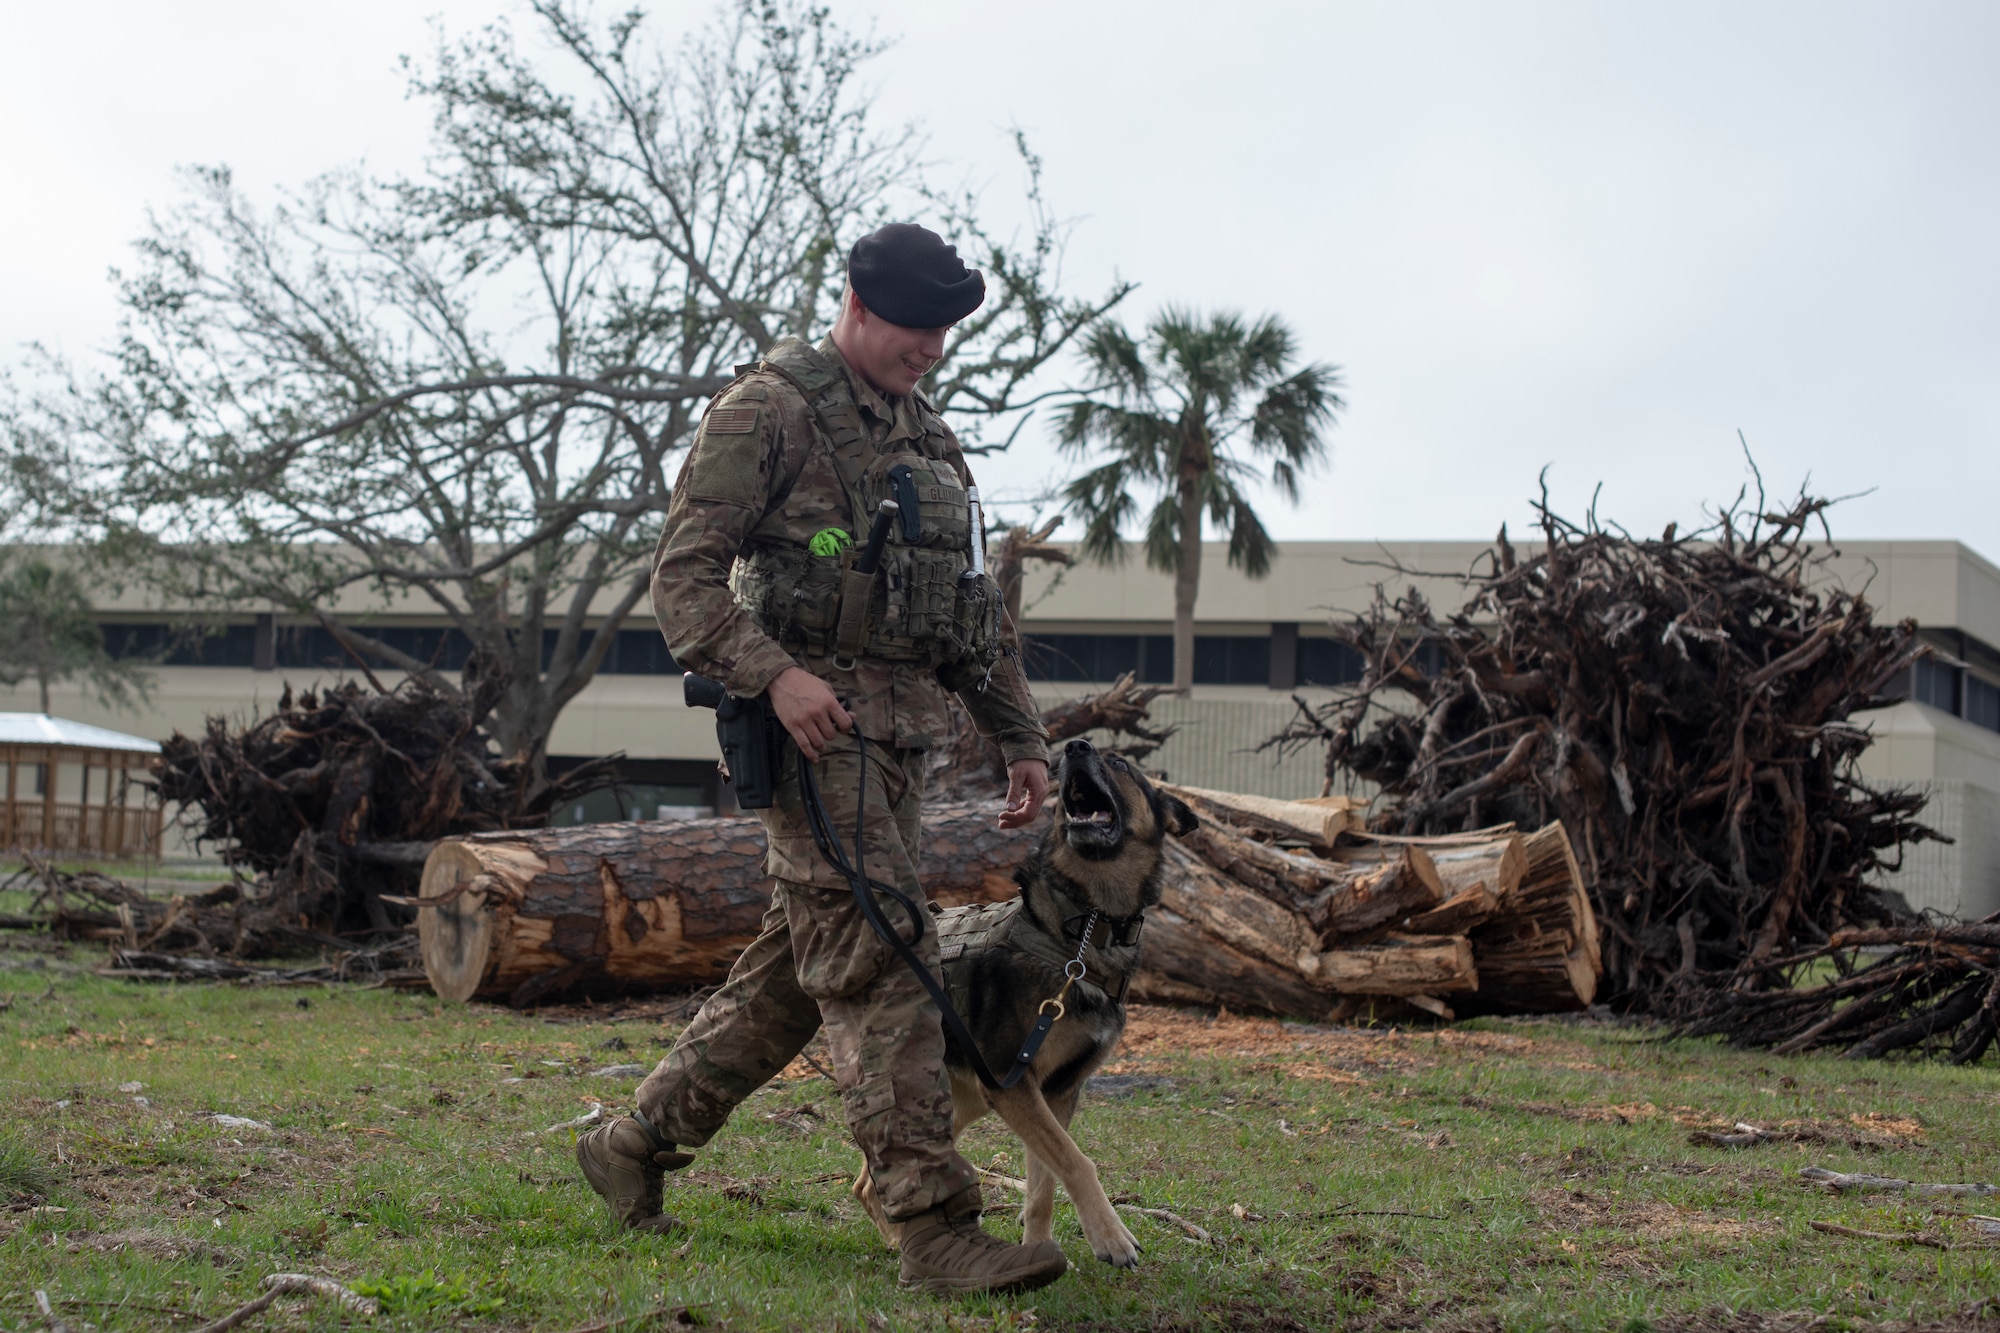 U.S. Air Force Staff Sgt. Matthew Gluvas, 99th Security Forces Squadron, Nellis Air Force Base, Nev., military working dog handler, walk with Alfi, 99th SFS military working dog, before going on patrol at Tyndall Air Force Base, Fla., Feb. 21, 2019. Gluvas has been on temporary duty at Tyndall since Oct. 31 assisting with the aftermath of Hurricane Michael. (U.S. Air Force photo by Senior Airman Javier Alvarez)